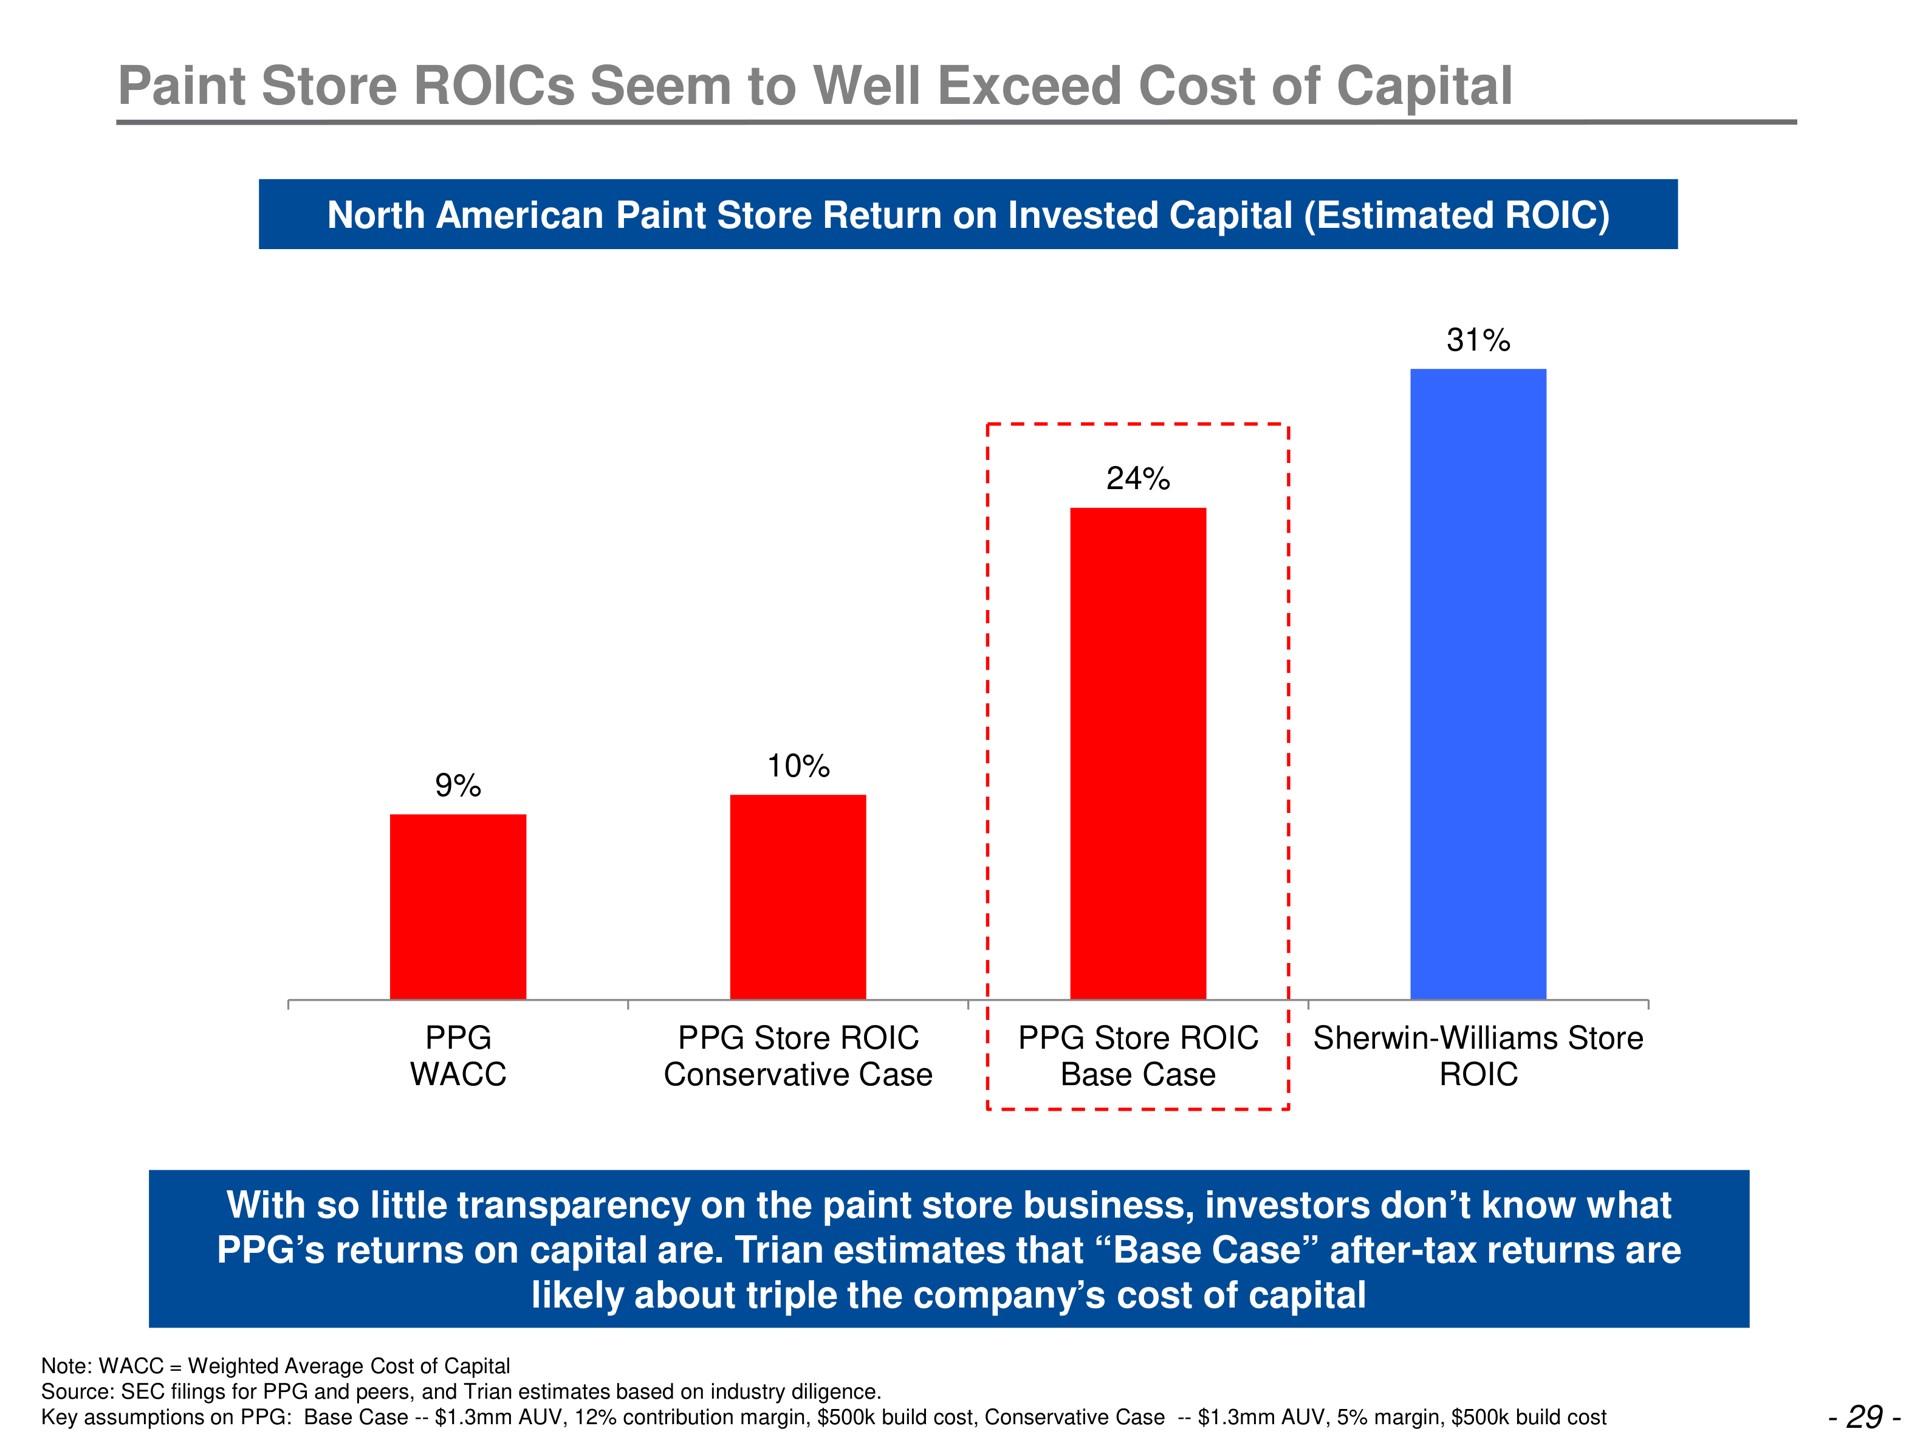 paint store seem to well exceed cost of capital | Trian Partners